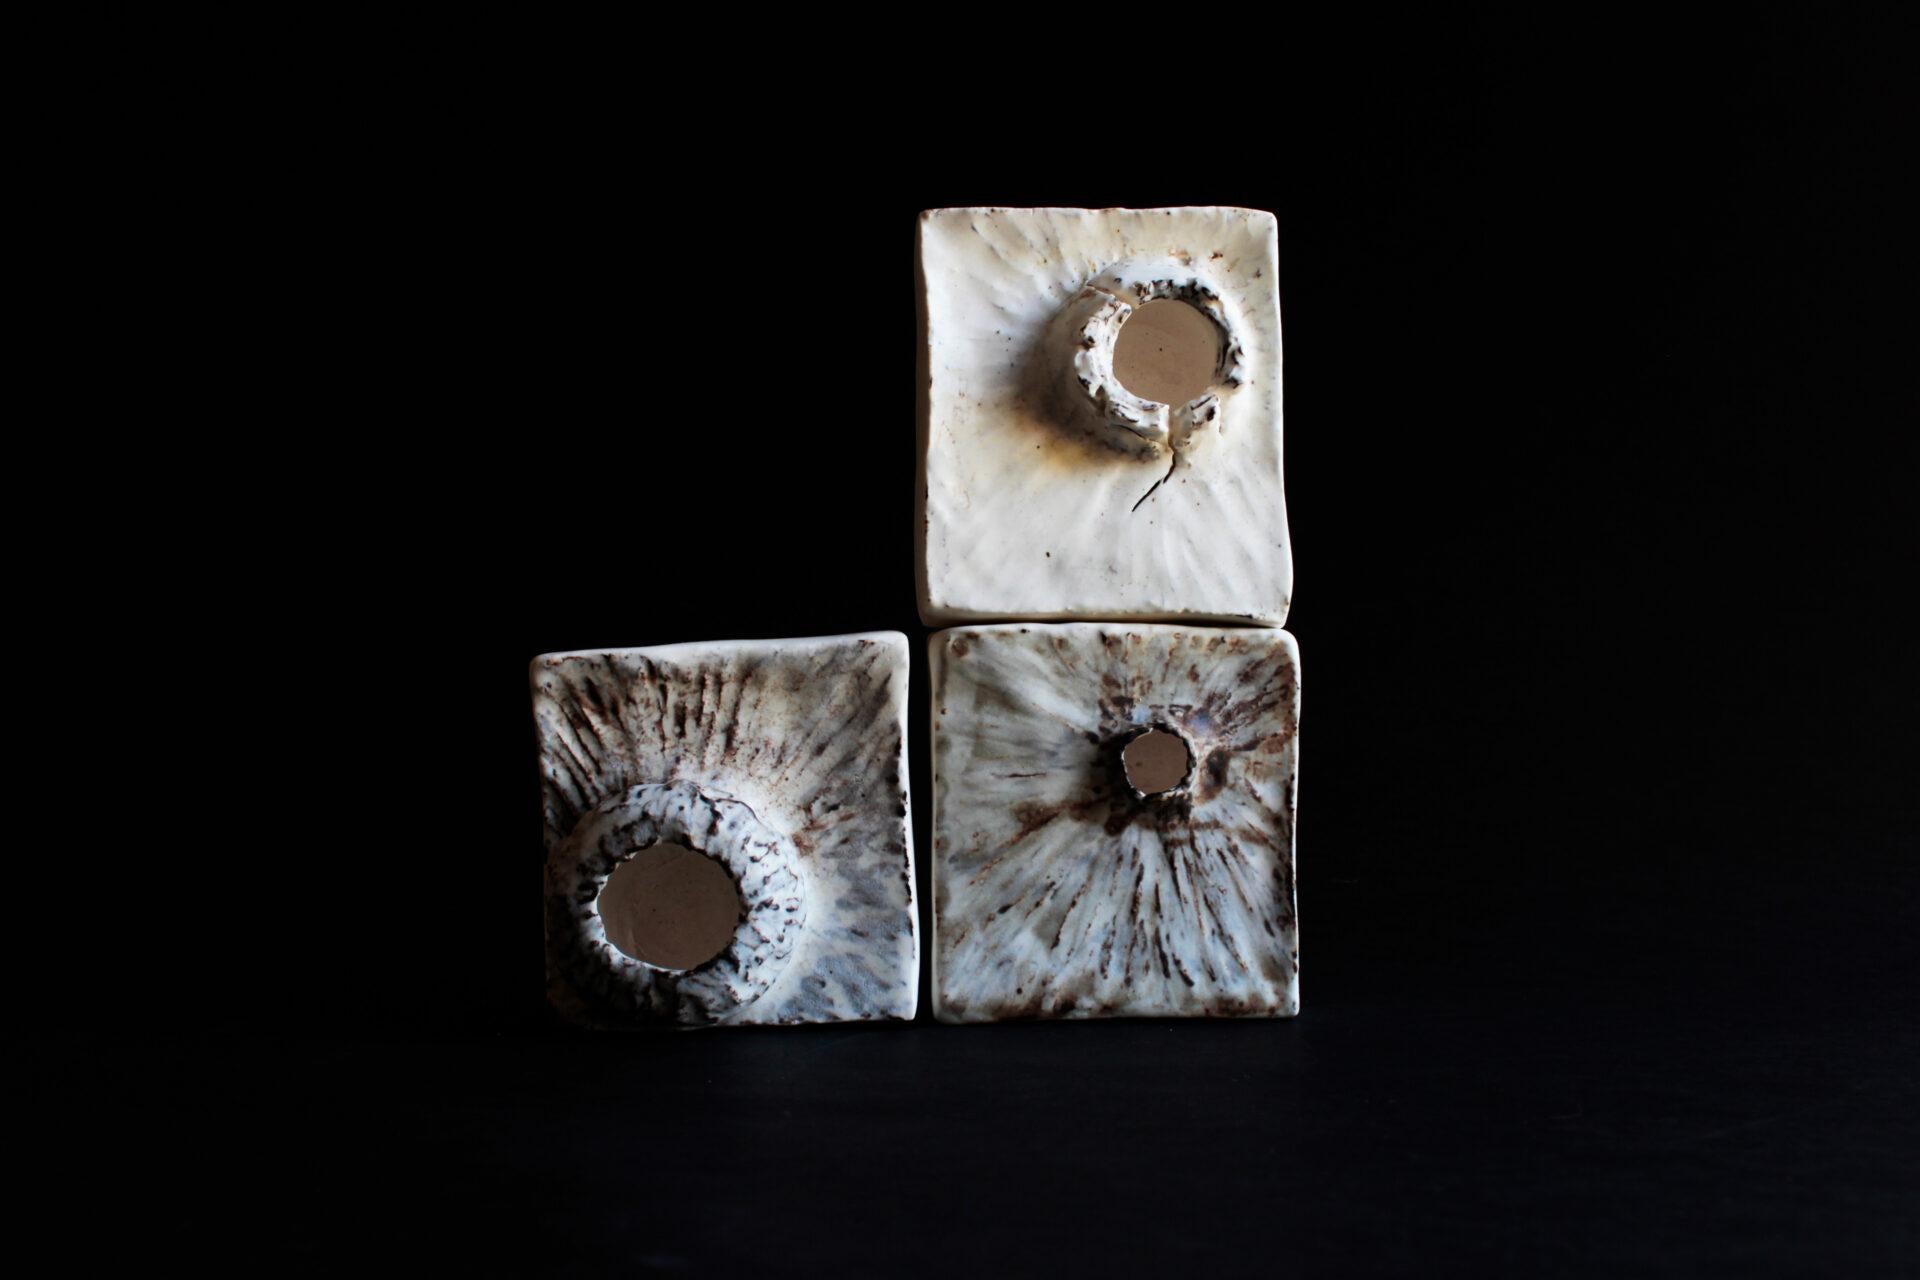 These solid blocks of porcelain represent the repetitive nature of resilience and perseverance, positive and negative space, all with the acknowledgment that no two outcomes will ever be the same. The pushing and pulling the clay showing the